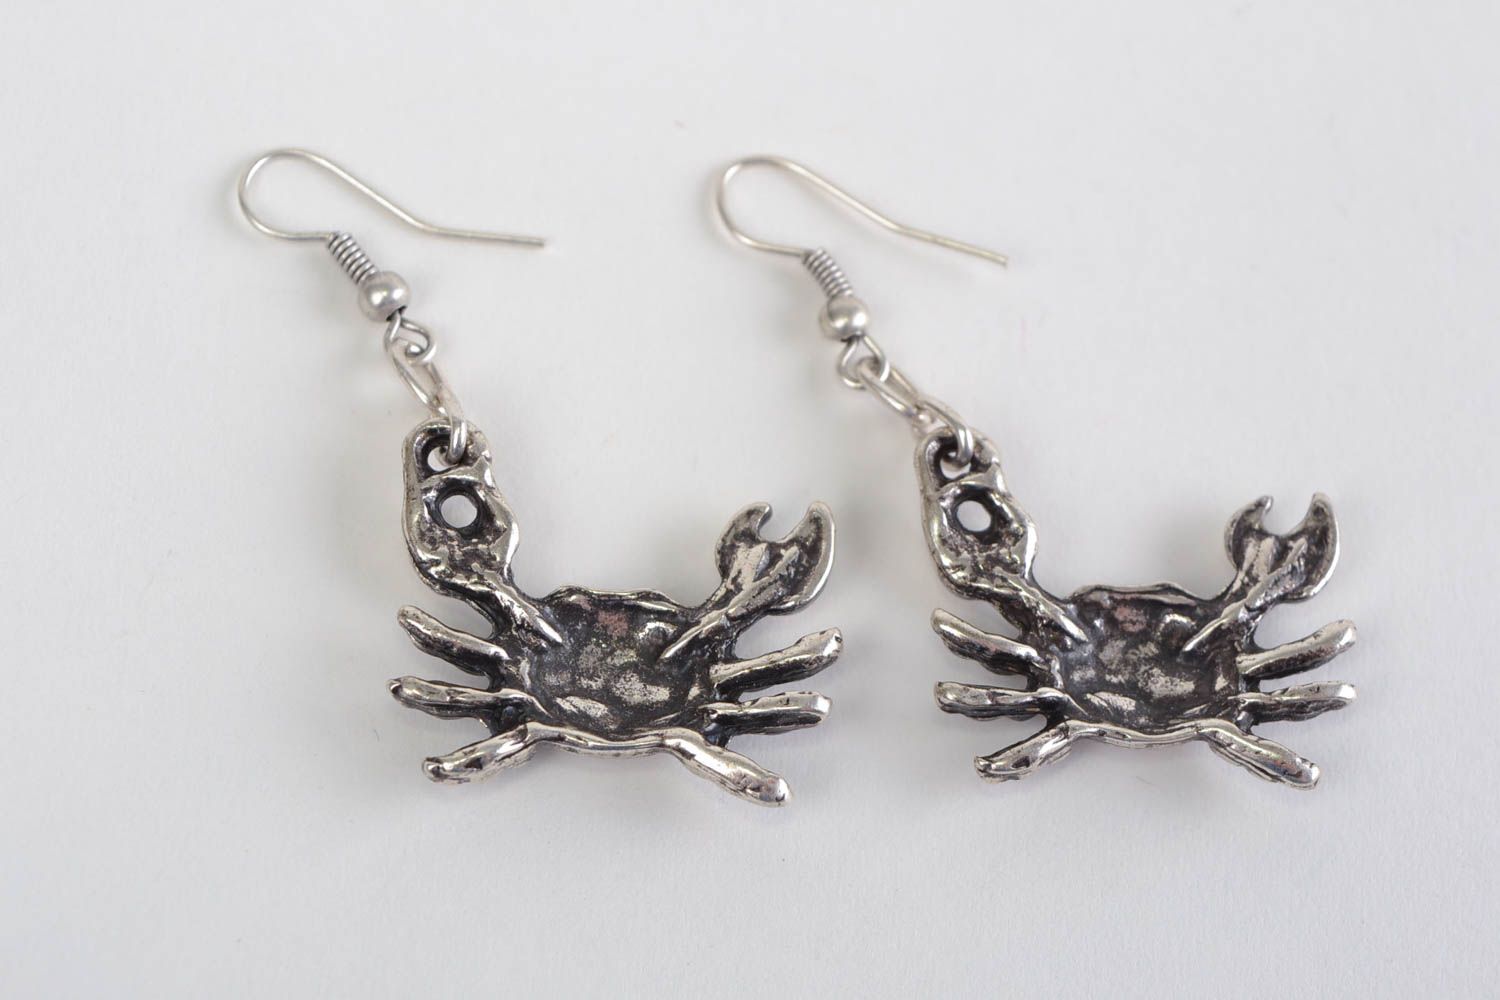 Small stylish handmade designer metal earrings in the shape of crabs photo 5